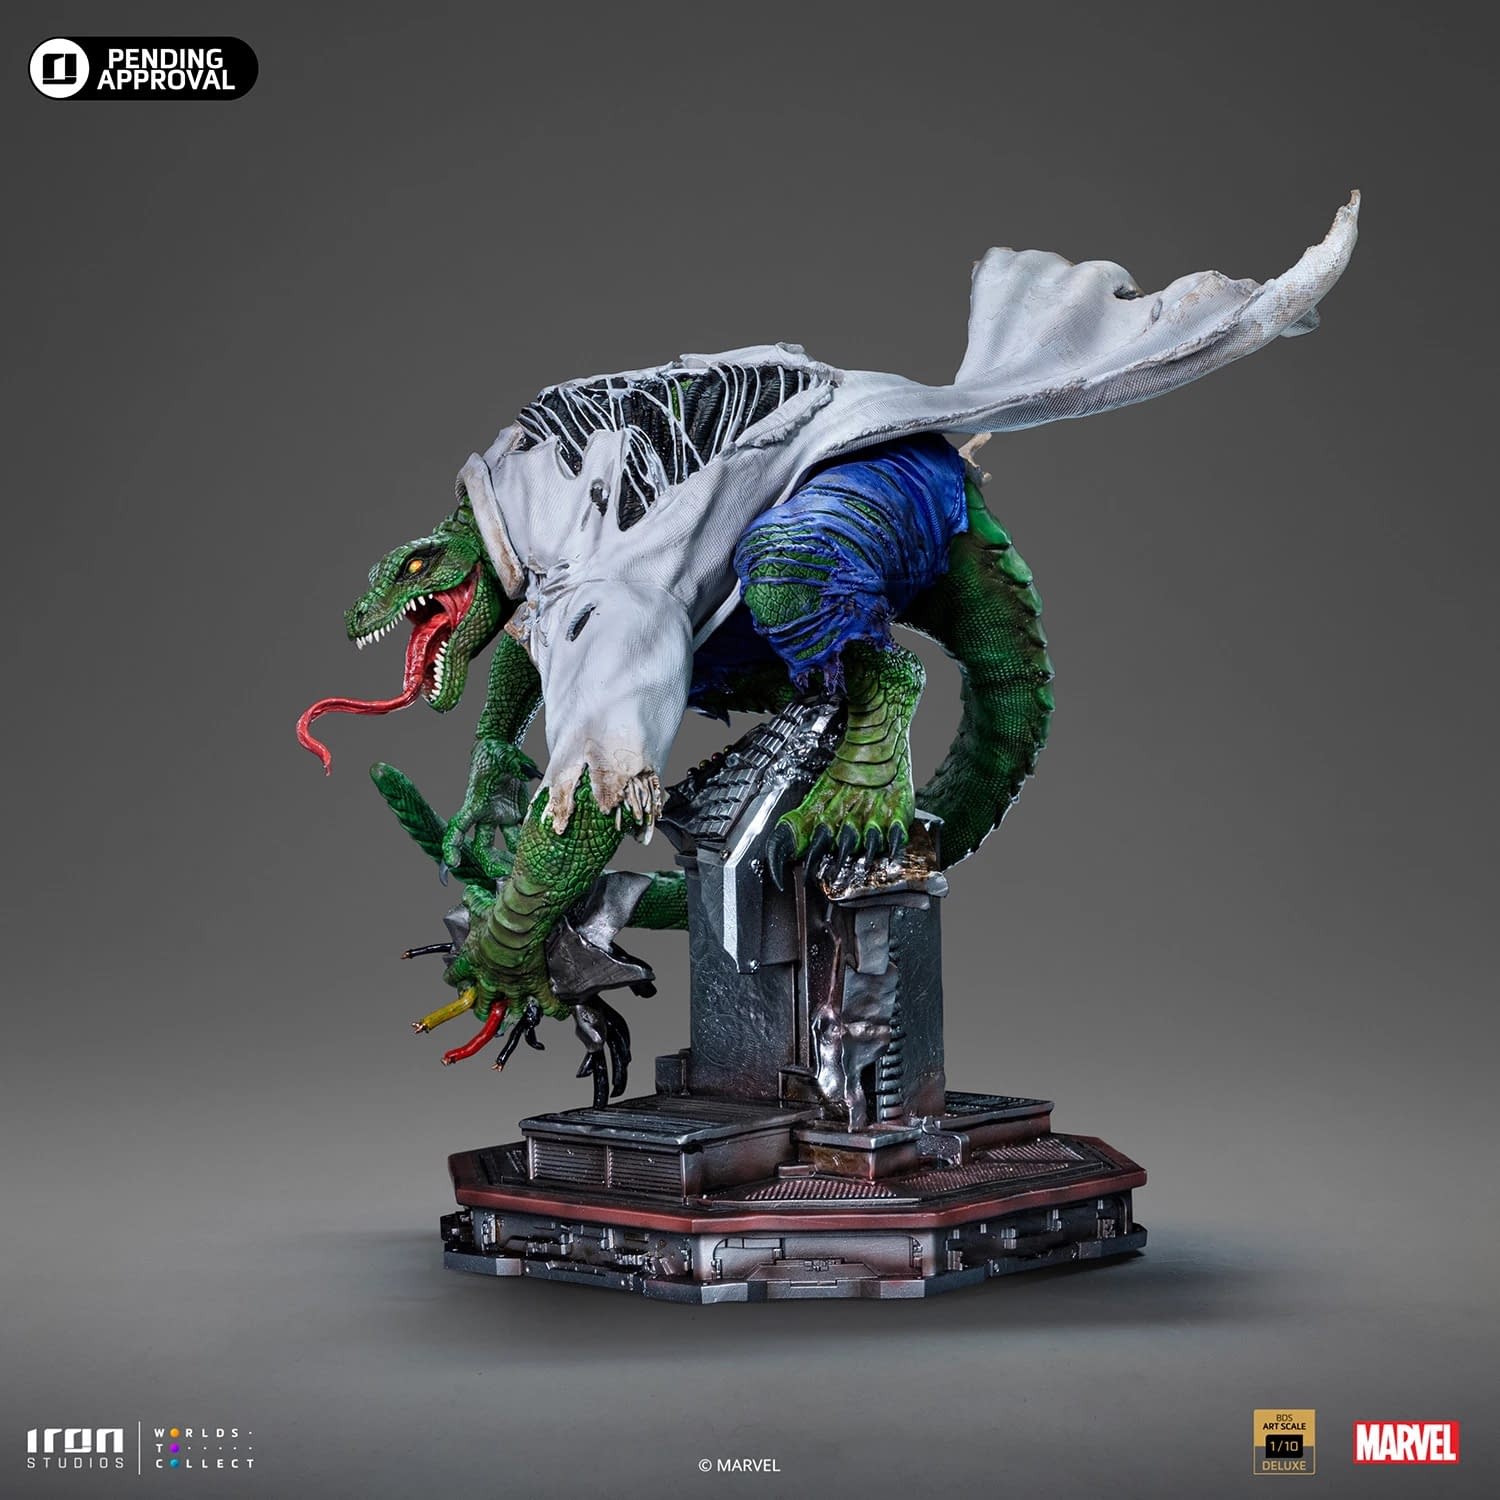 Spider-Man vs. Villains The Lizard Diorama Revealed by Iron Studios4